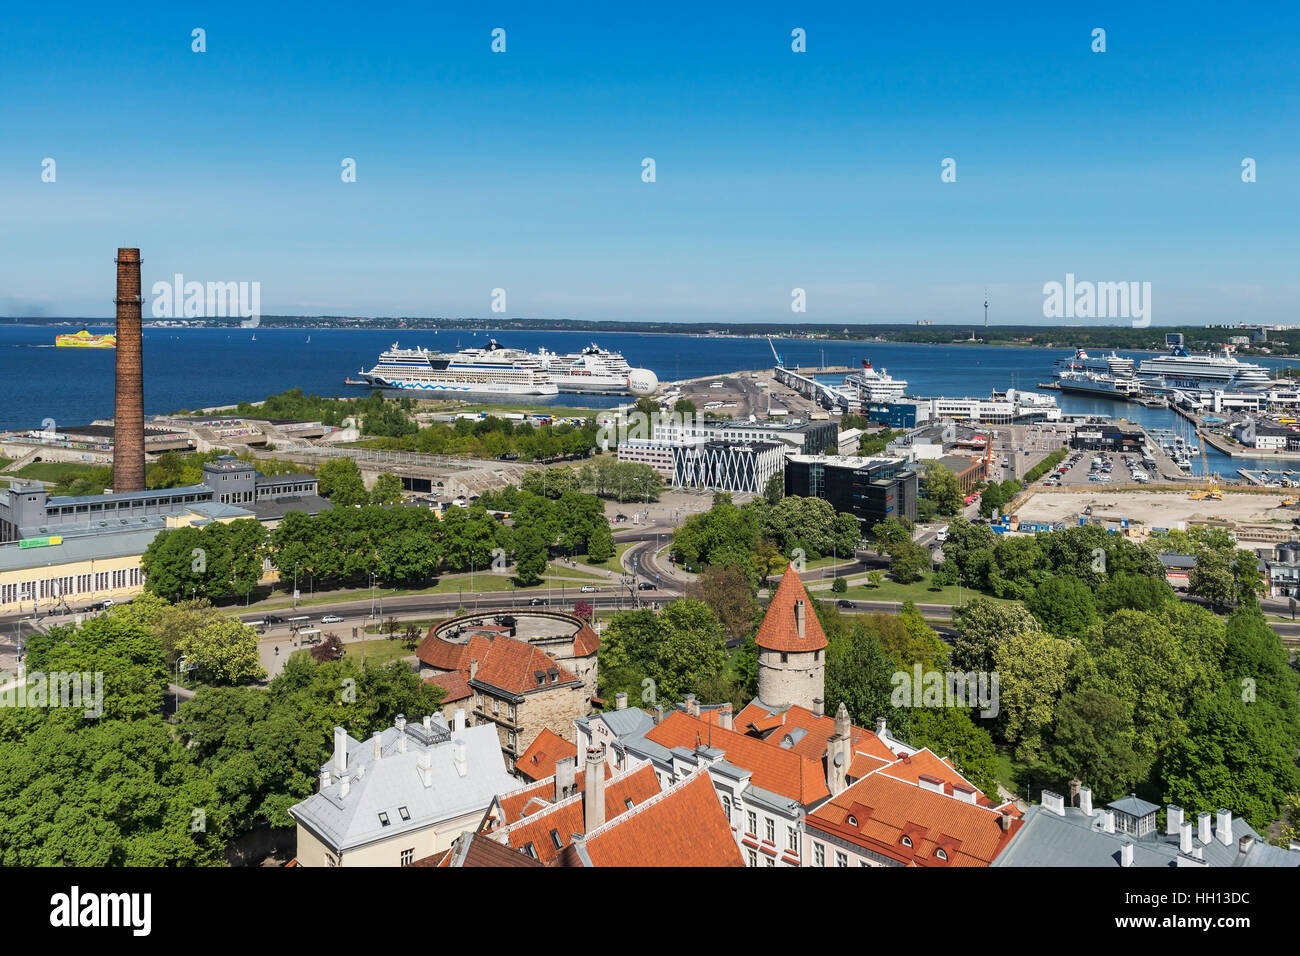 View over the old town of Tallinn to the Baltic Sea and the port of Tallinn, Estonia, Baltic States, Europe Stock Photo